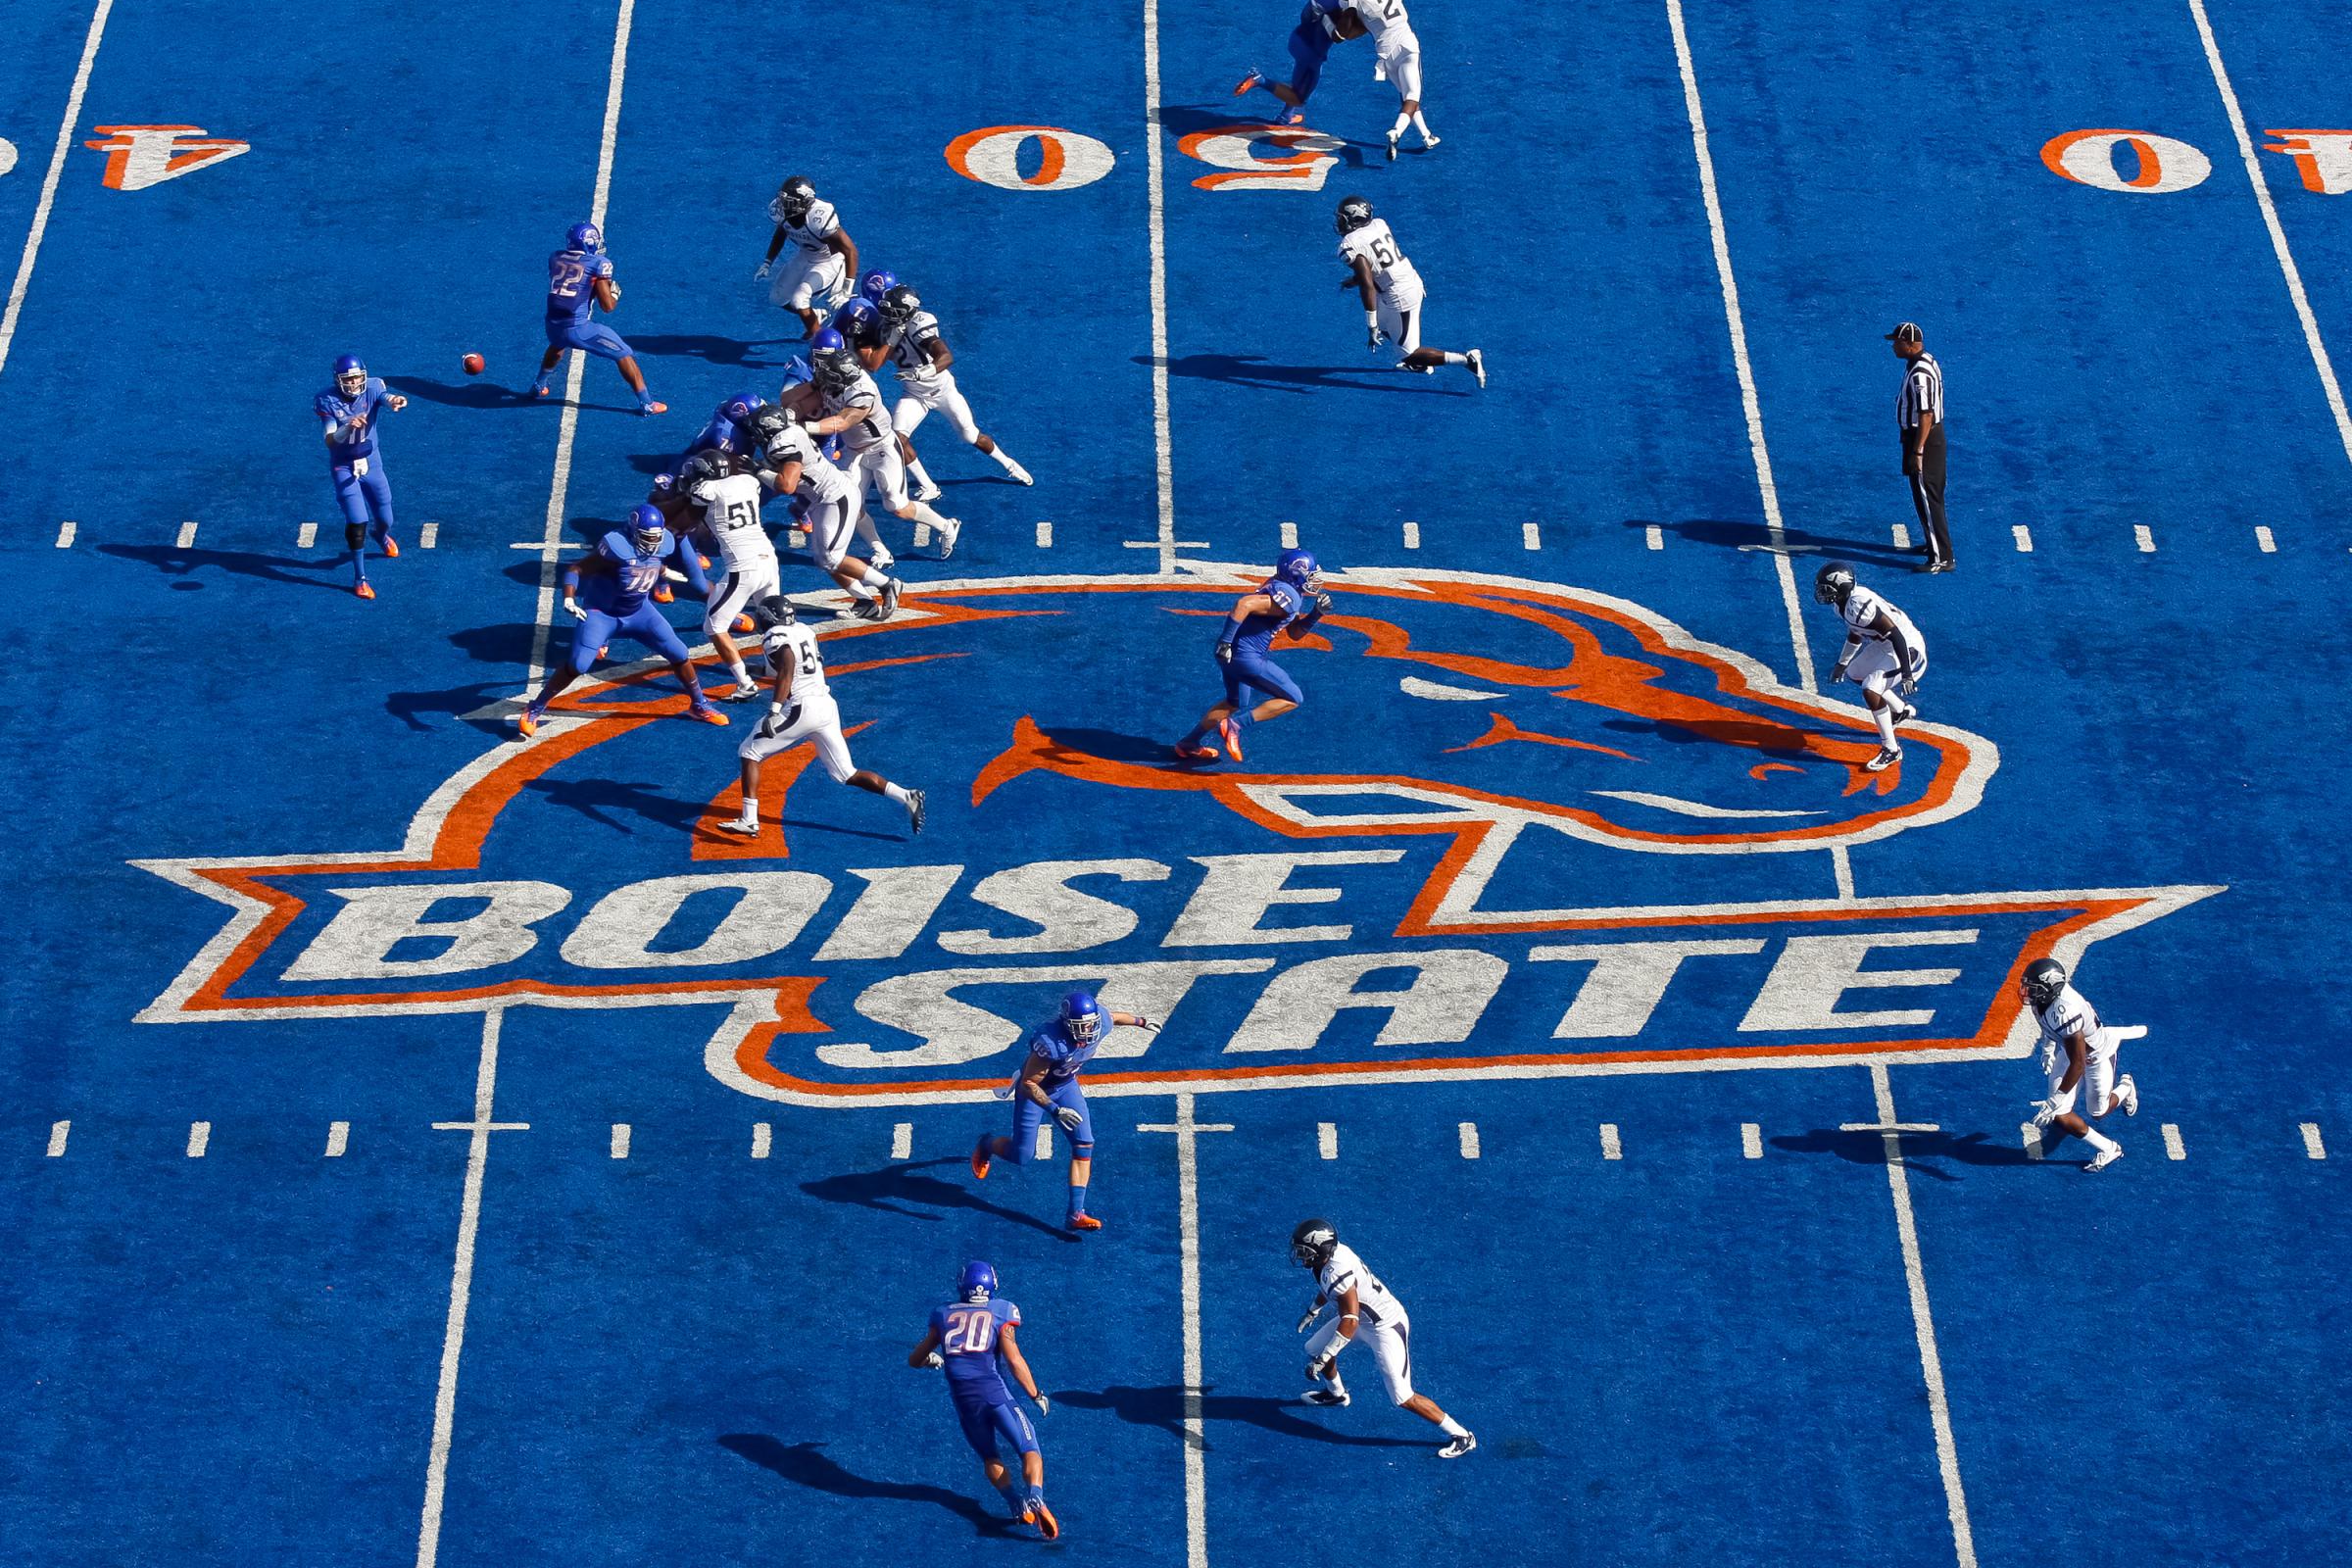 Kellen Moore #11 of the Boise State Broncos (L) passes against the Nevada Wolf Pack at Bronco Stadium in Boise, Idaho on Oct. 1, 2011.